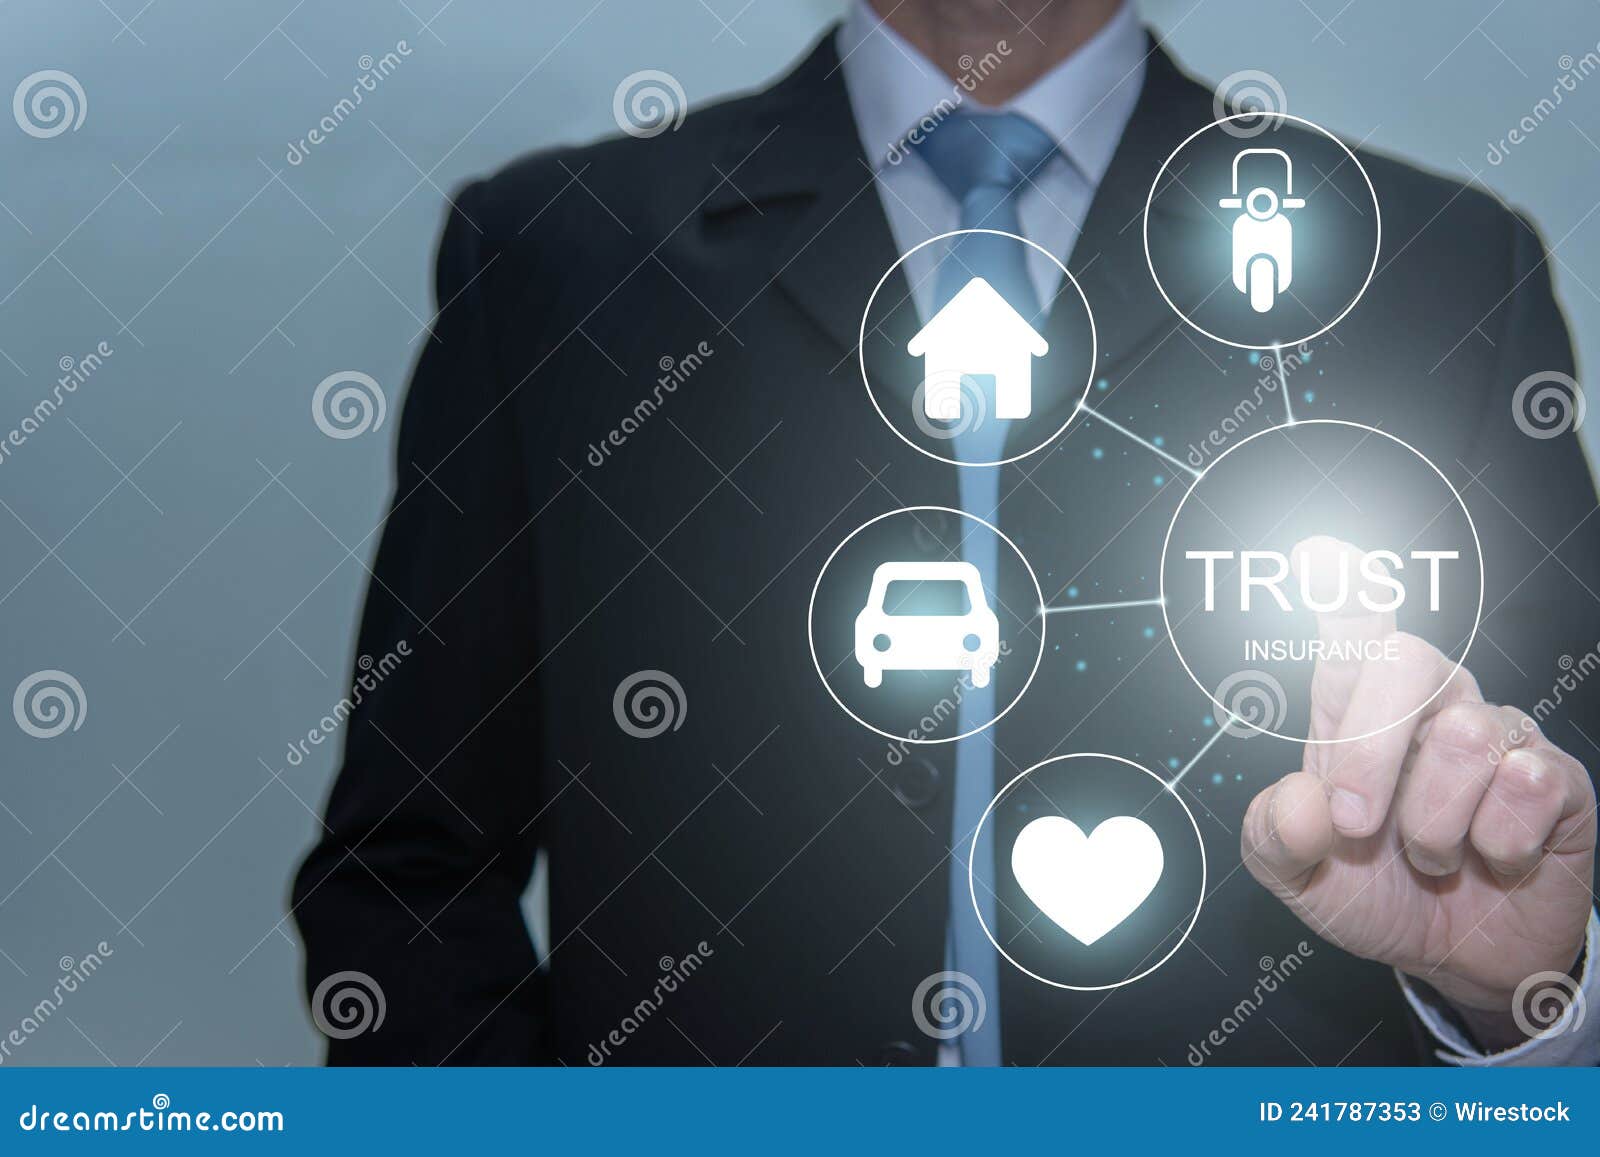 businessman touching trust icon. life, house, car and motorcicle